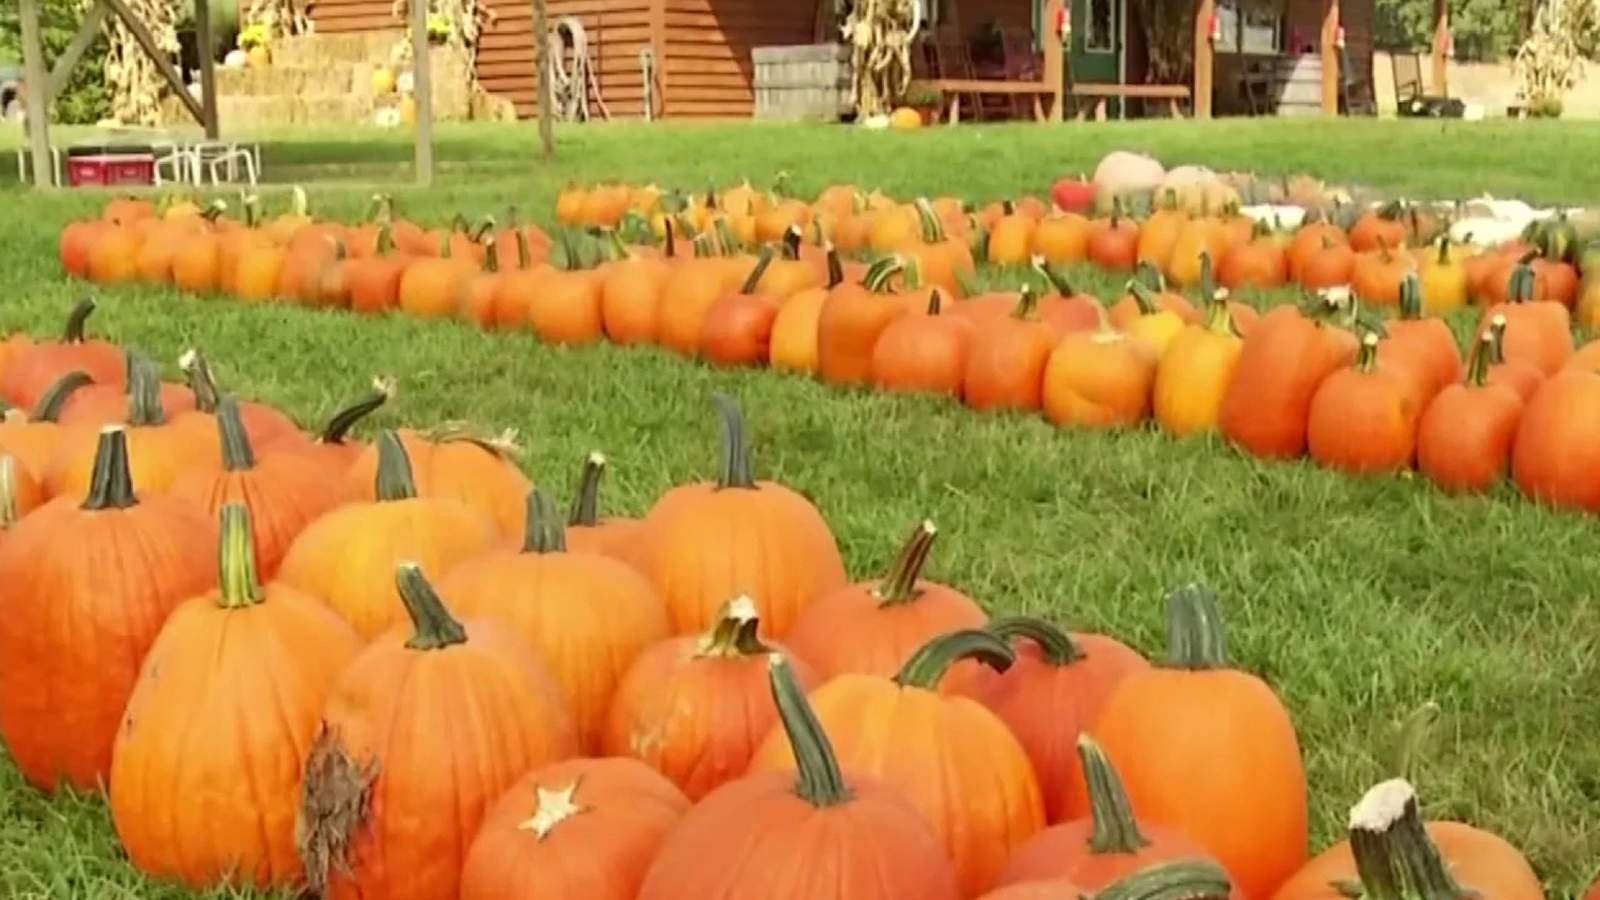 2020′s weather could lead to a local pumpkin shortage